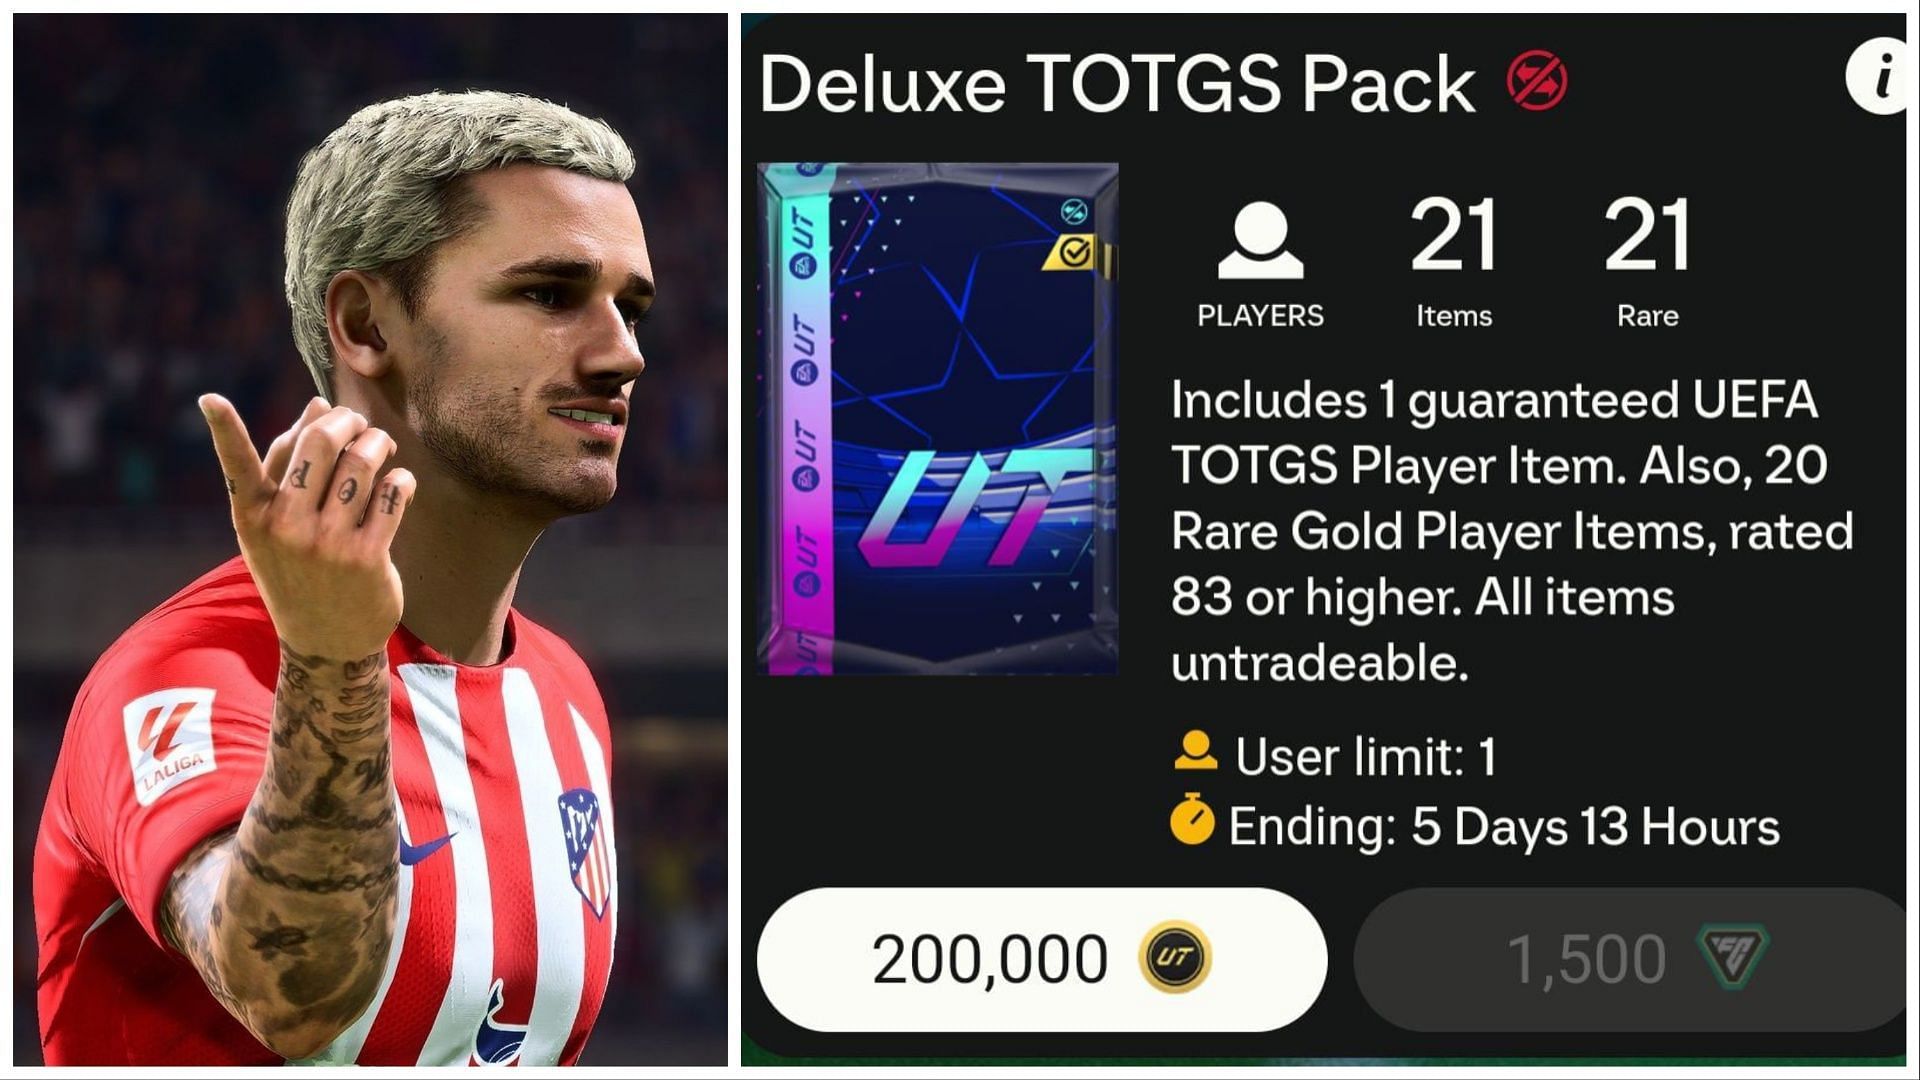 The latest special pack is now available (Images via EA Sports)